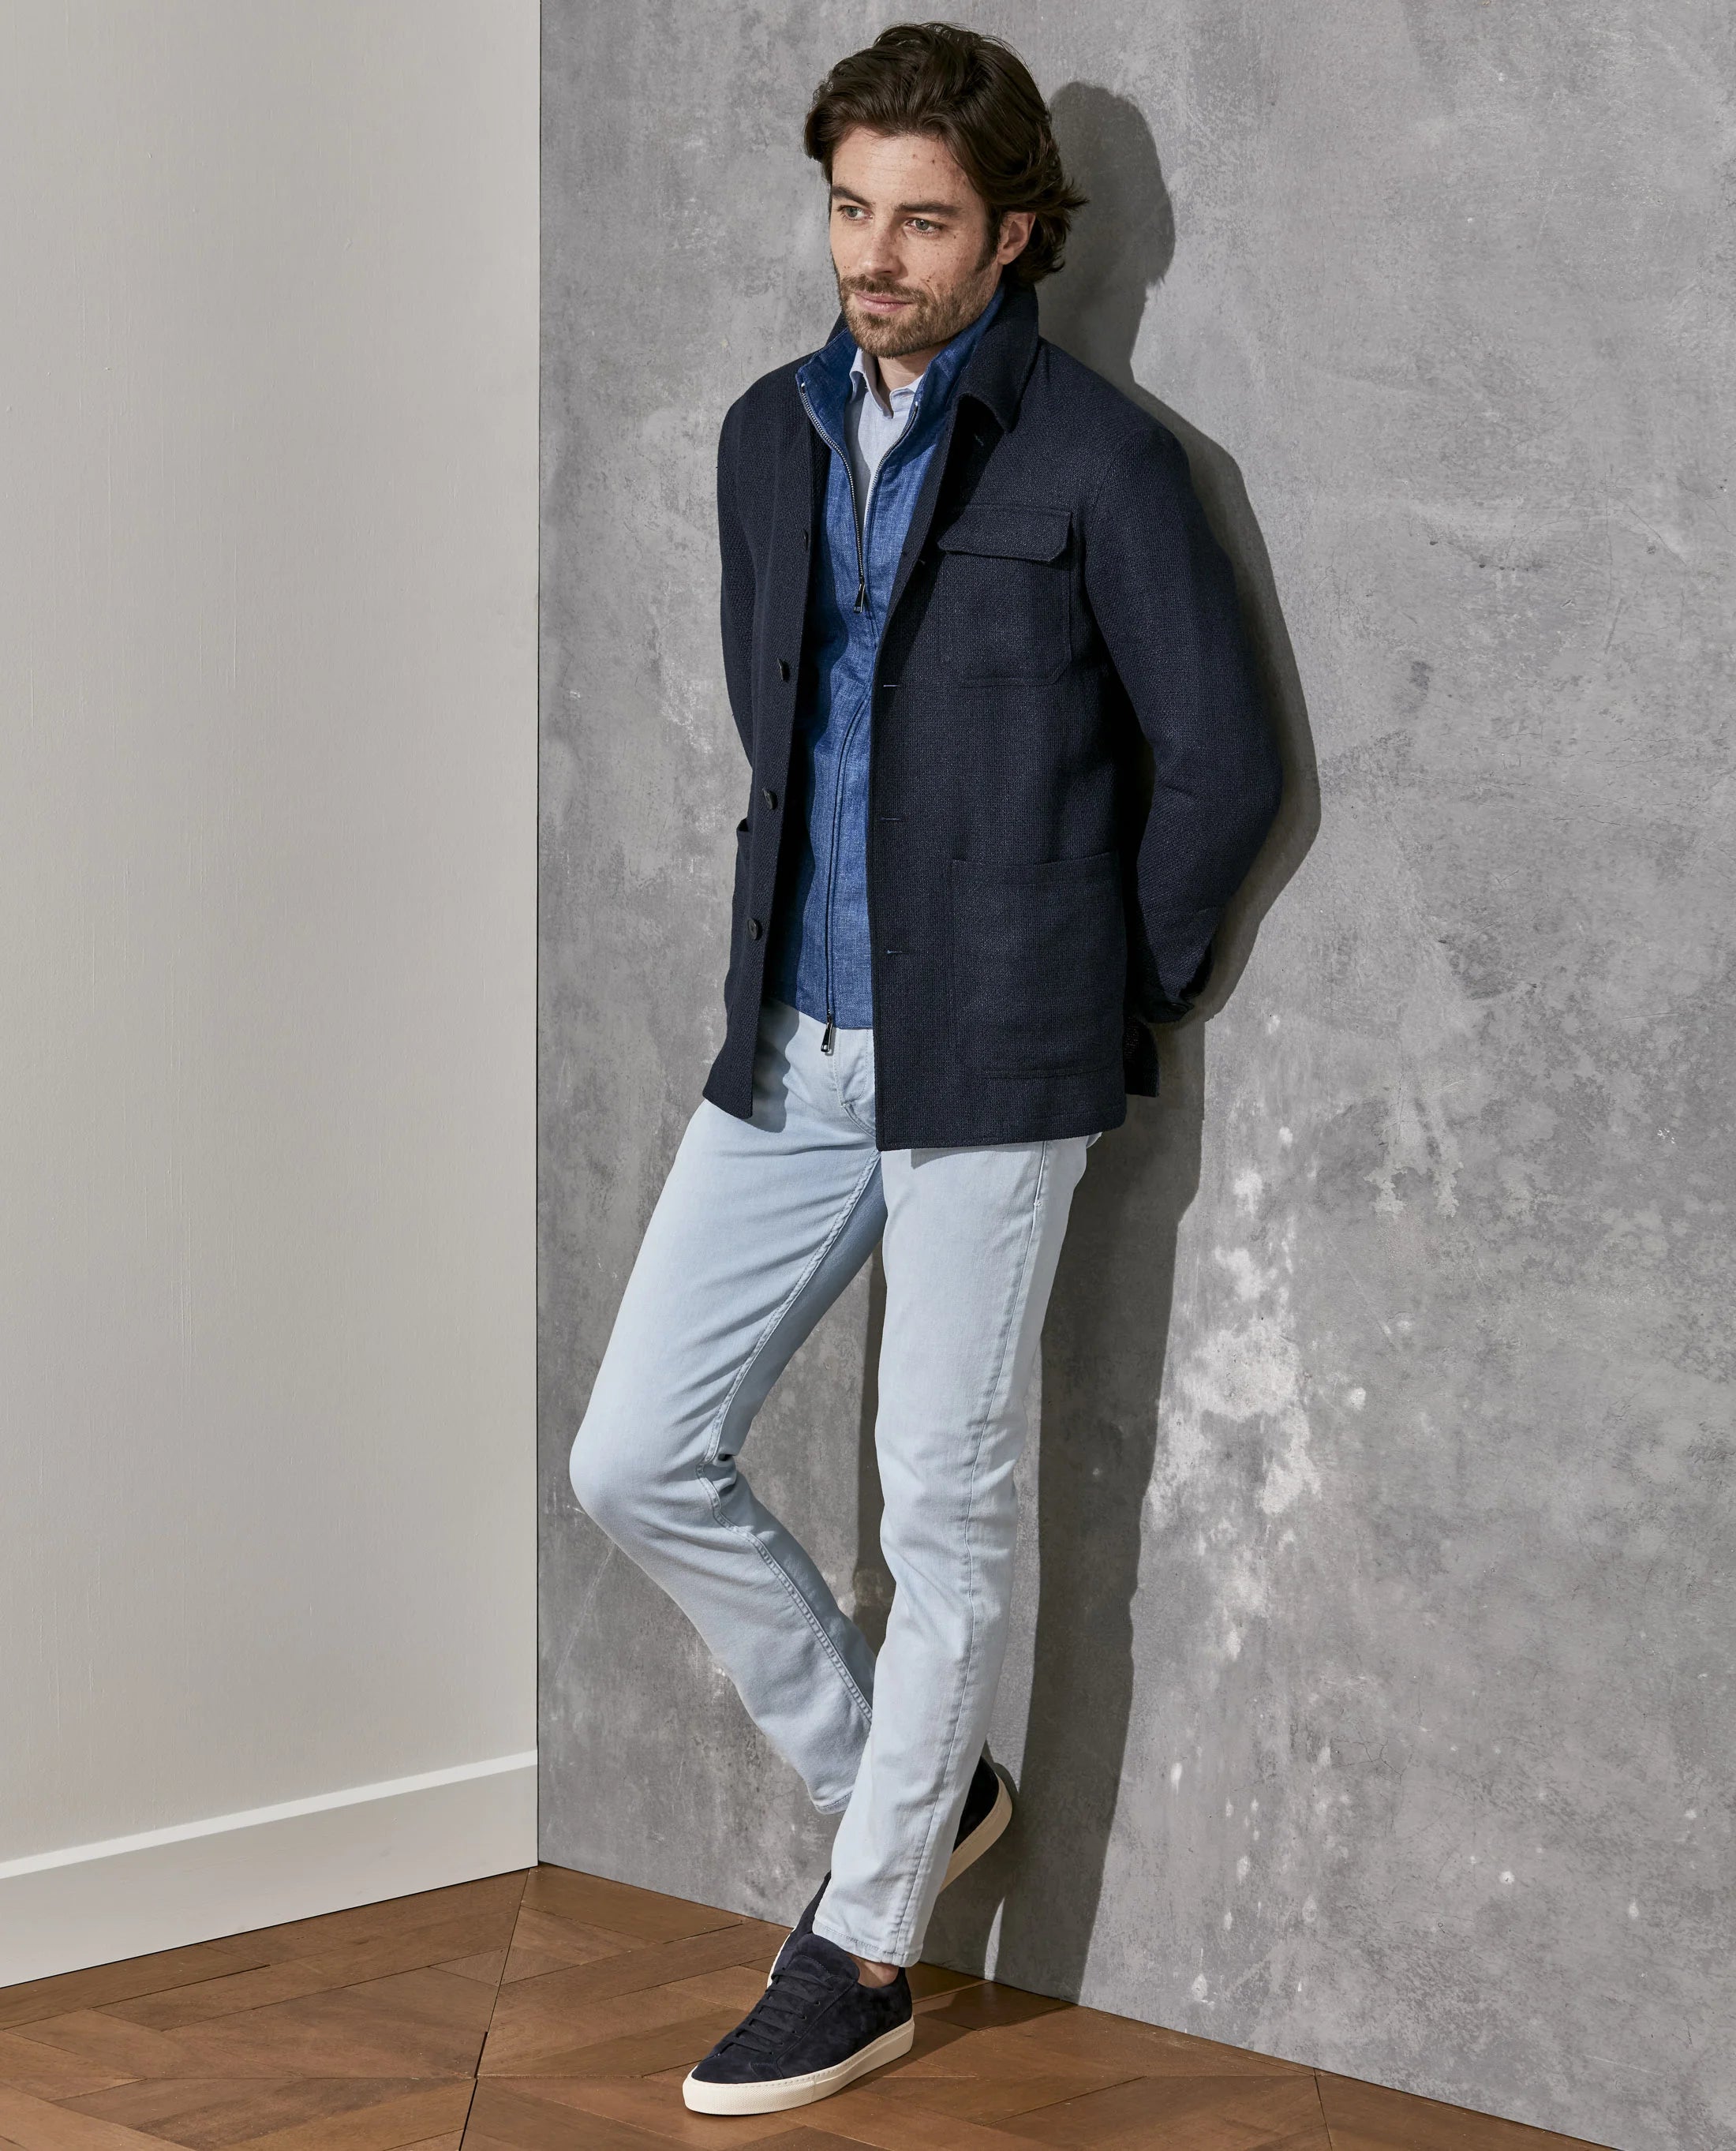 All-blue-utility-jacket-vest-shirt-jeans-sneakers-Search-SS24-look-22-0c909deb962c42edaba5d3daad8dfddf.webp